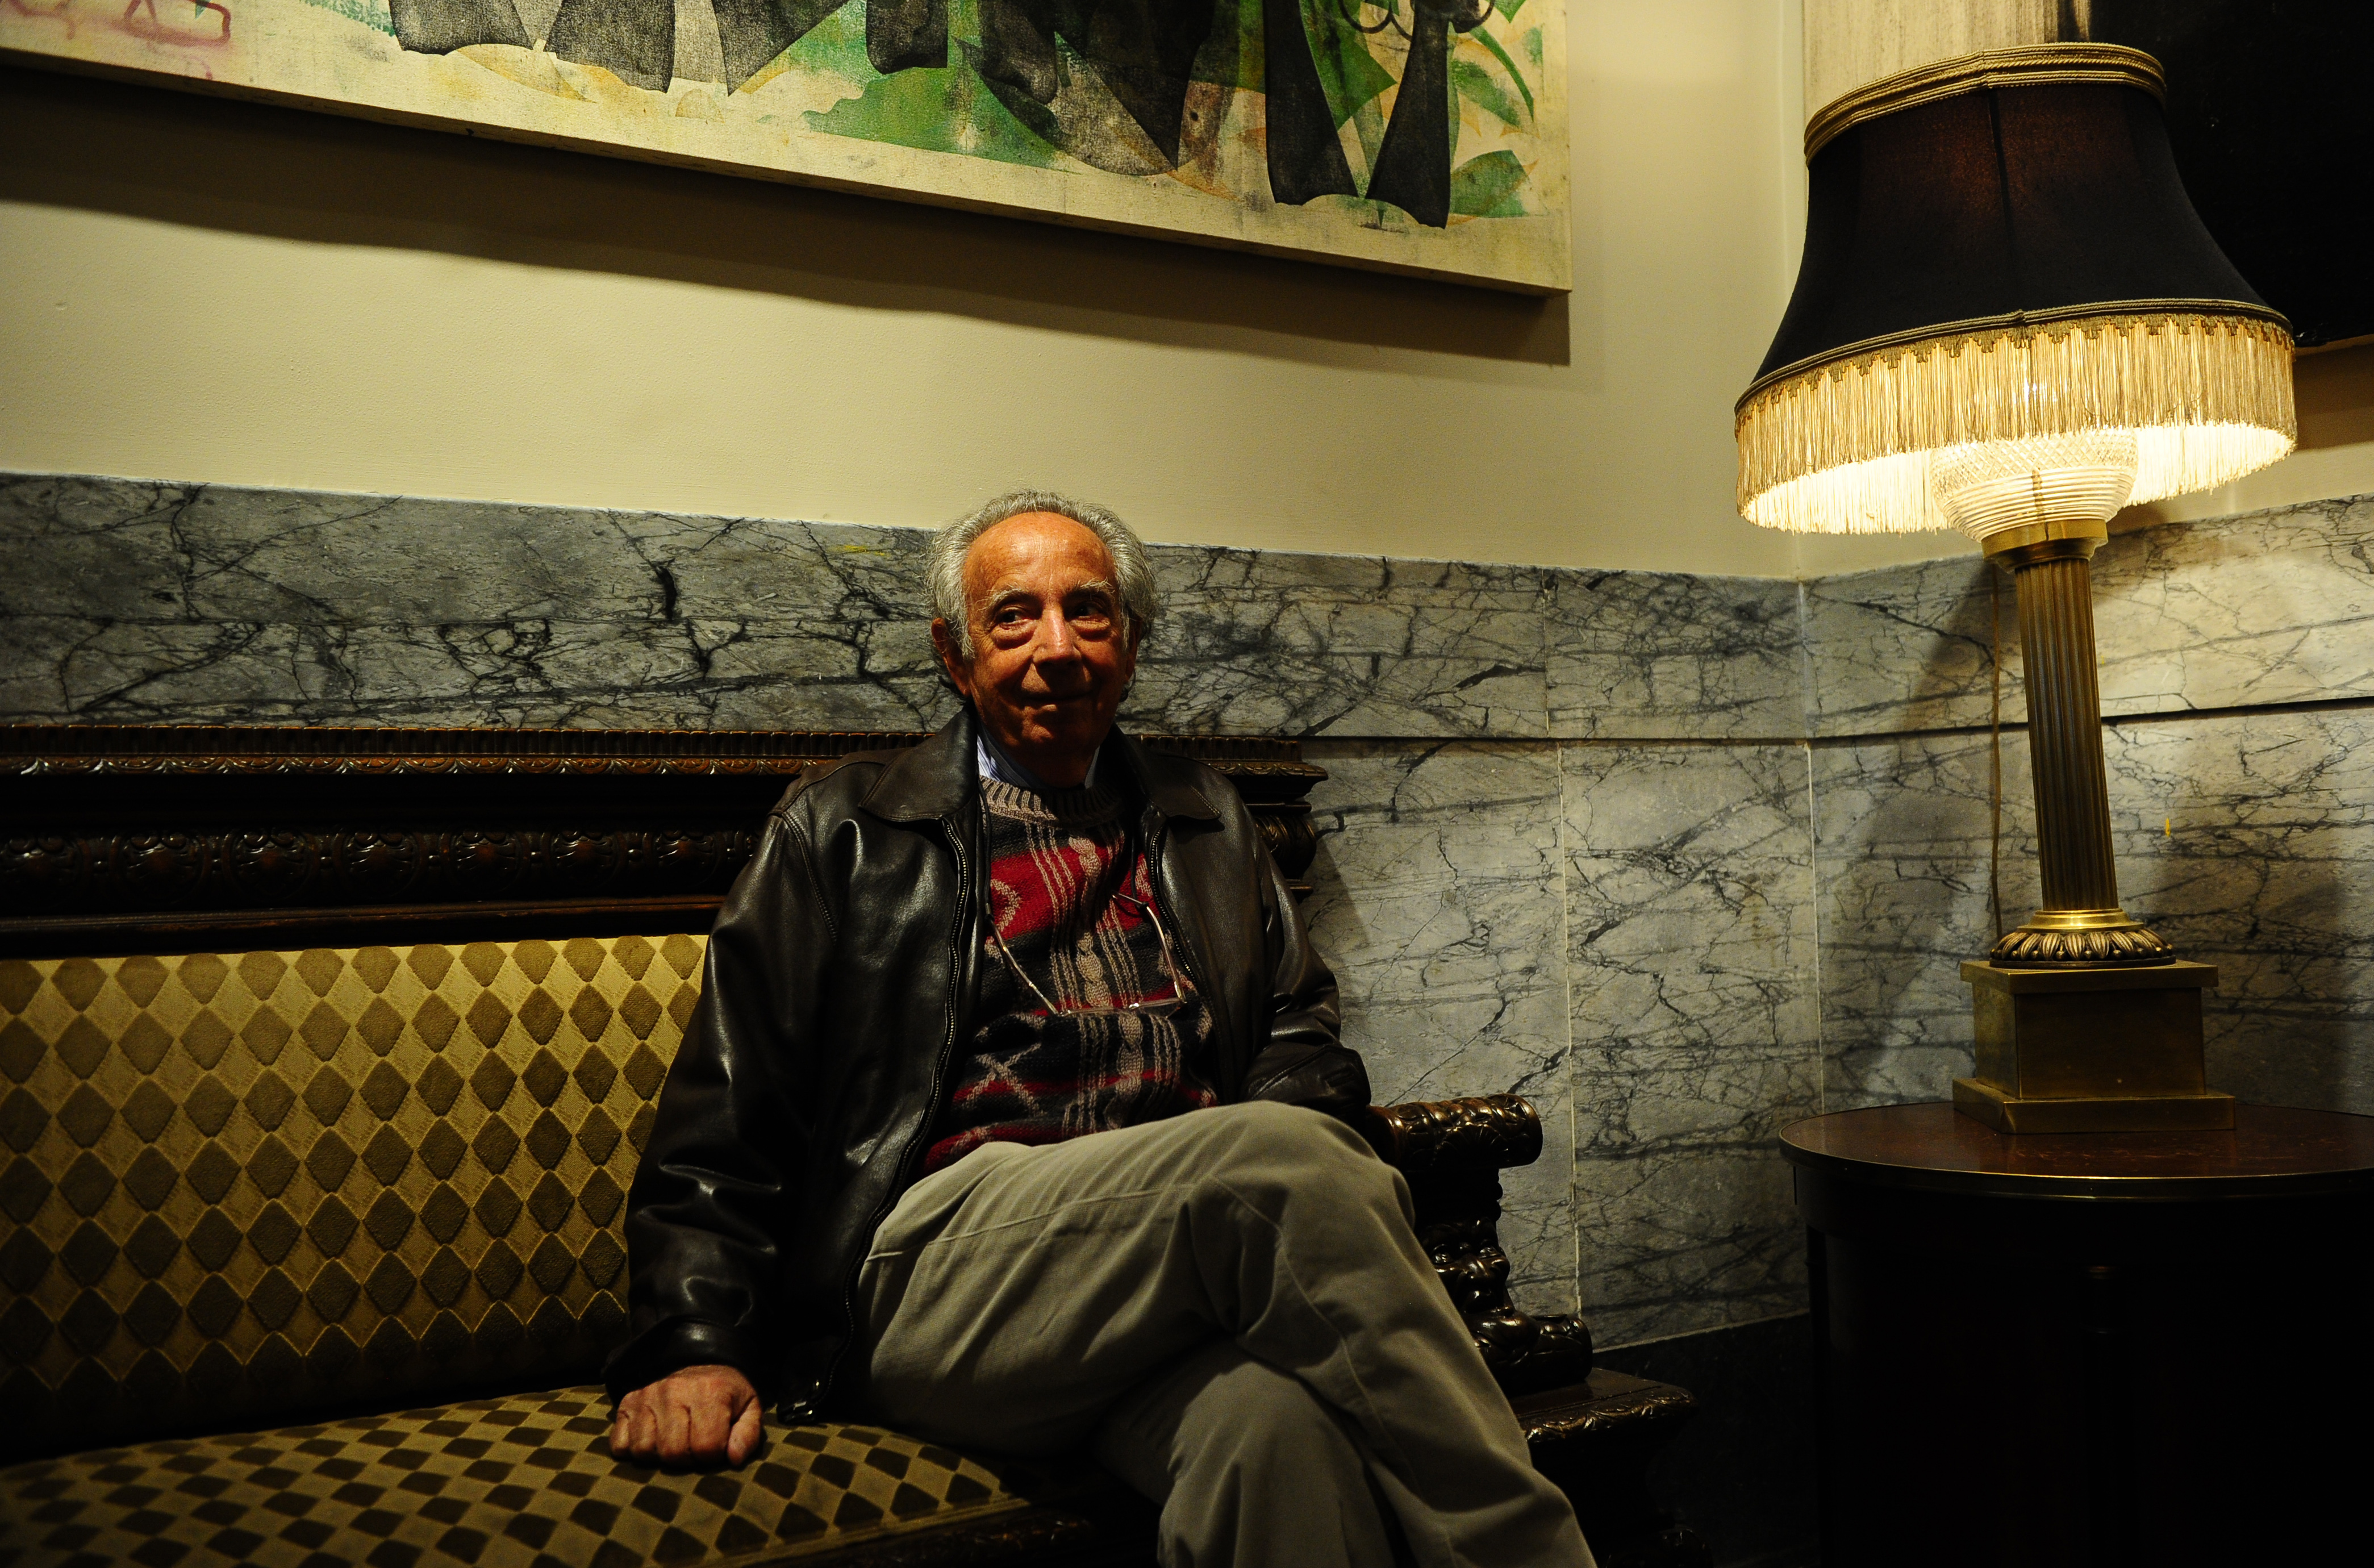 Former long-time Chelsea Hotel manager Stanley Bard in the lobby of the Chelsea Hotel in New York, January 10, 2011.